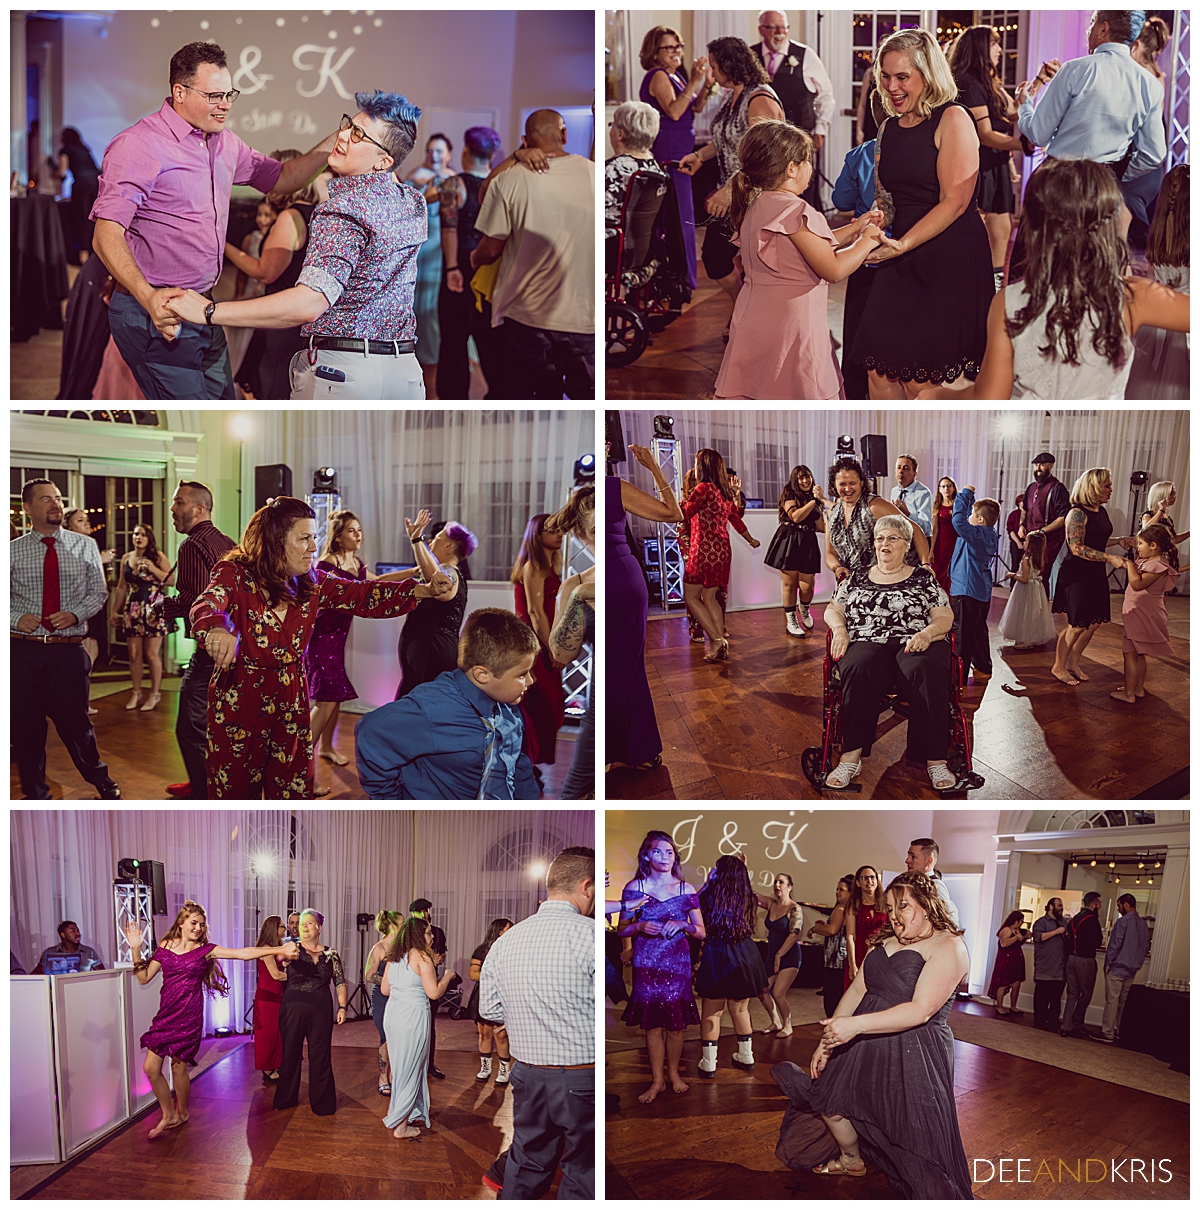 Six images of guests dancing.